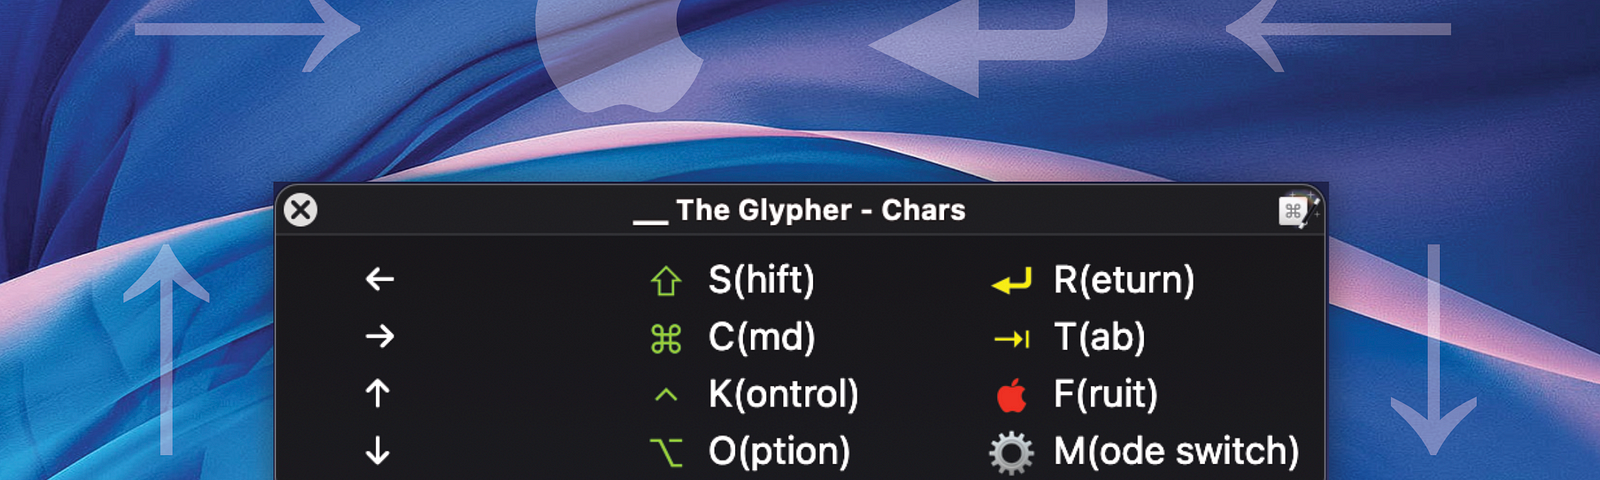 Rectangular window on a blue flowy fabric macOS background, showing keyboard shortcuts for the macOS modifier keys for Shift, Command, Control, Option, Return, Tab, the Apple symbol, and arrow keys.